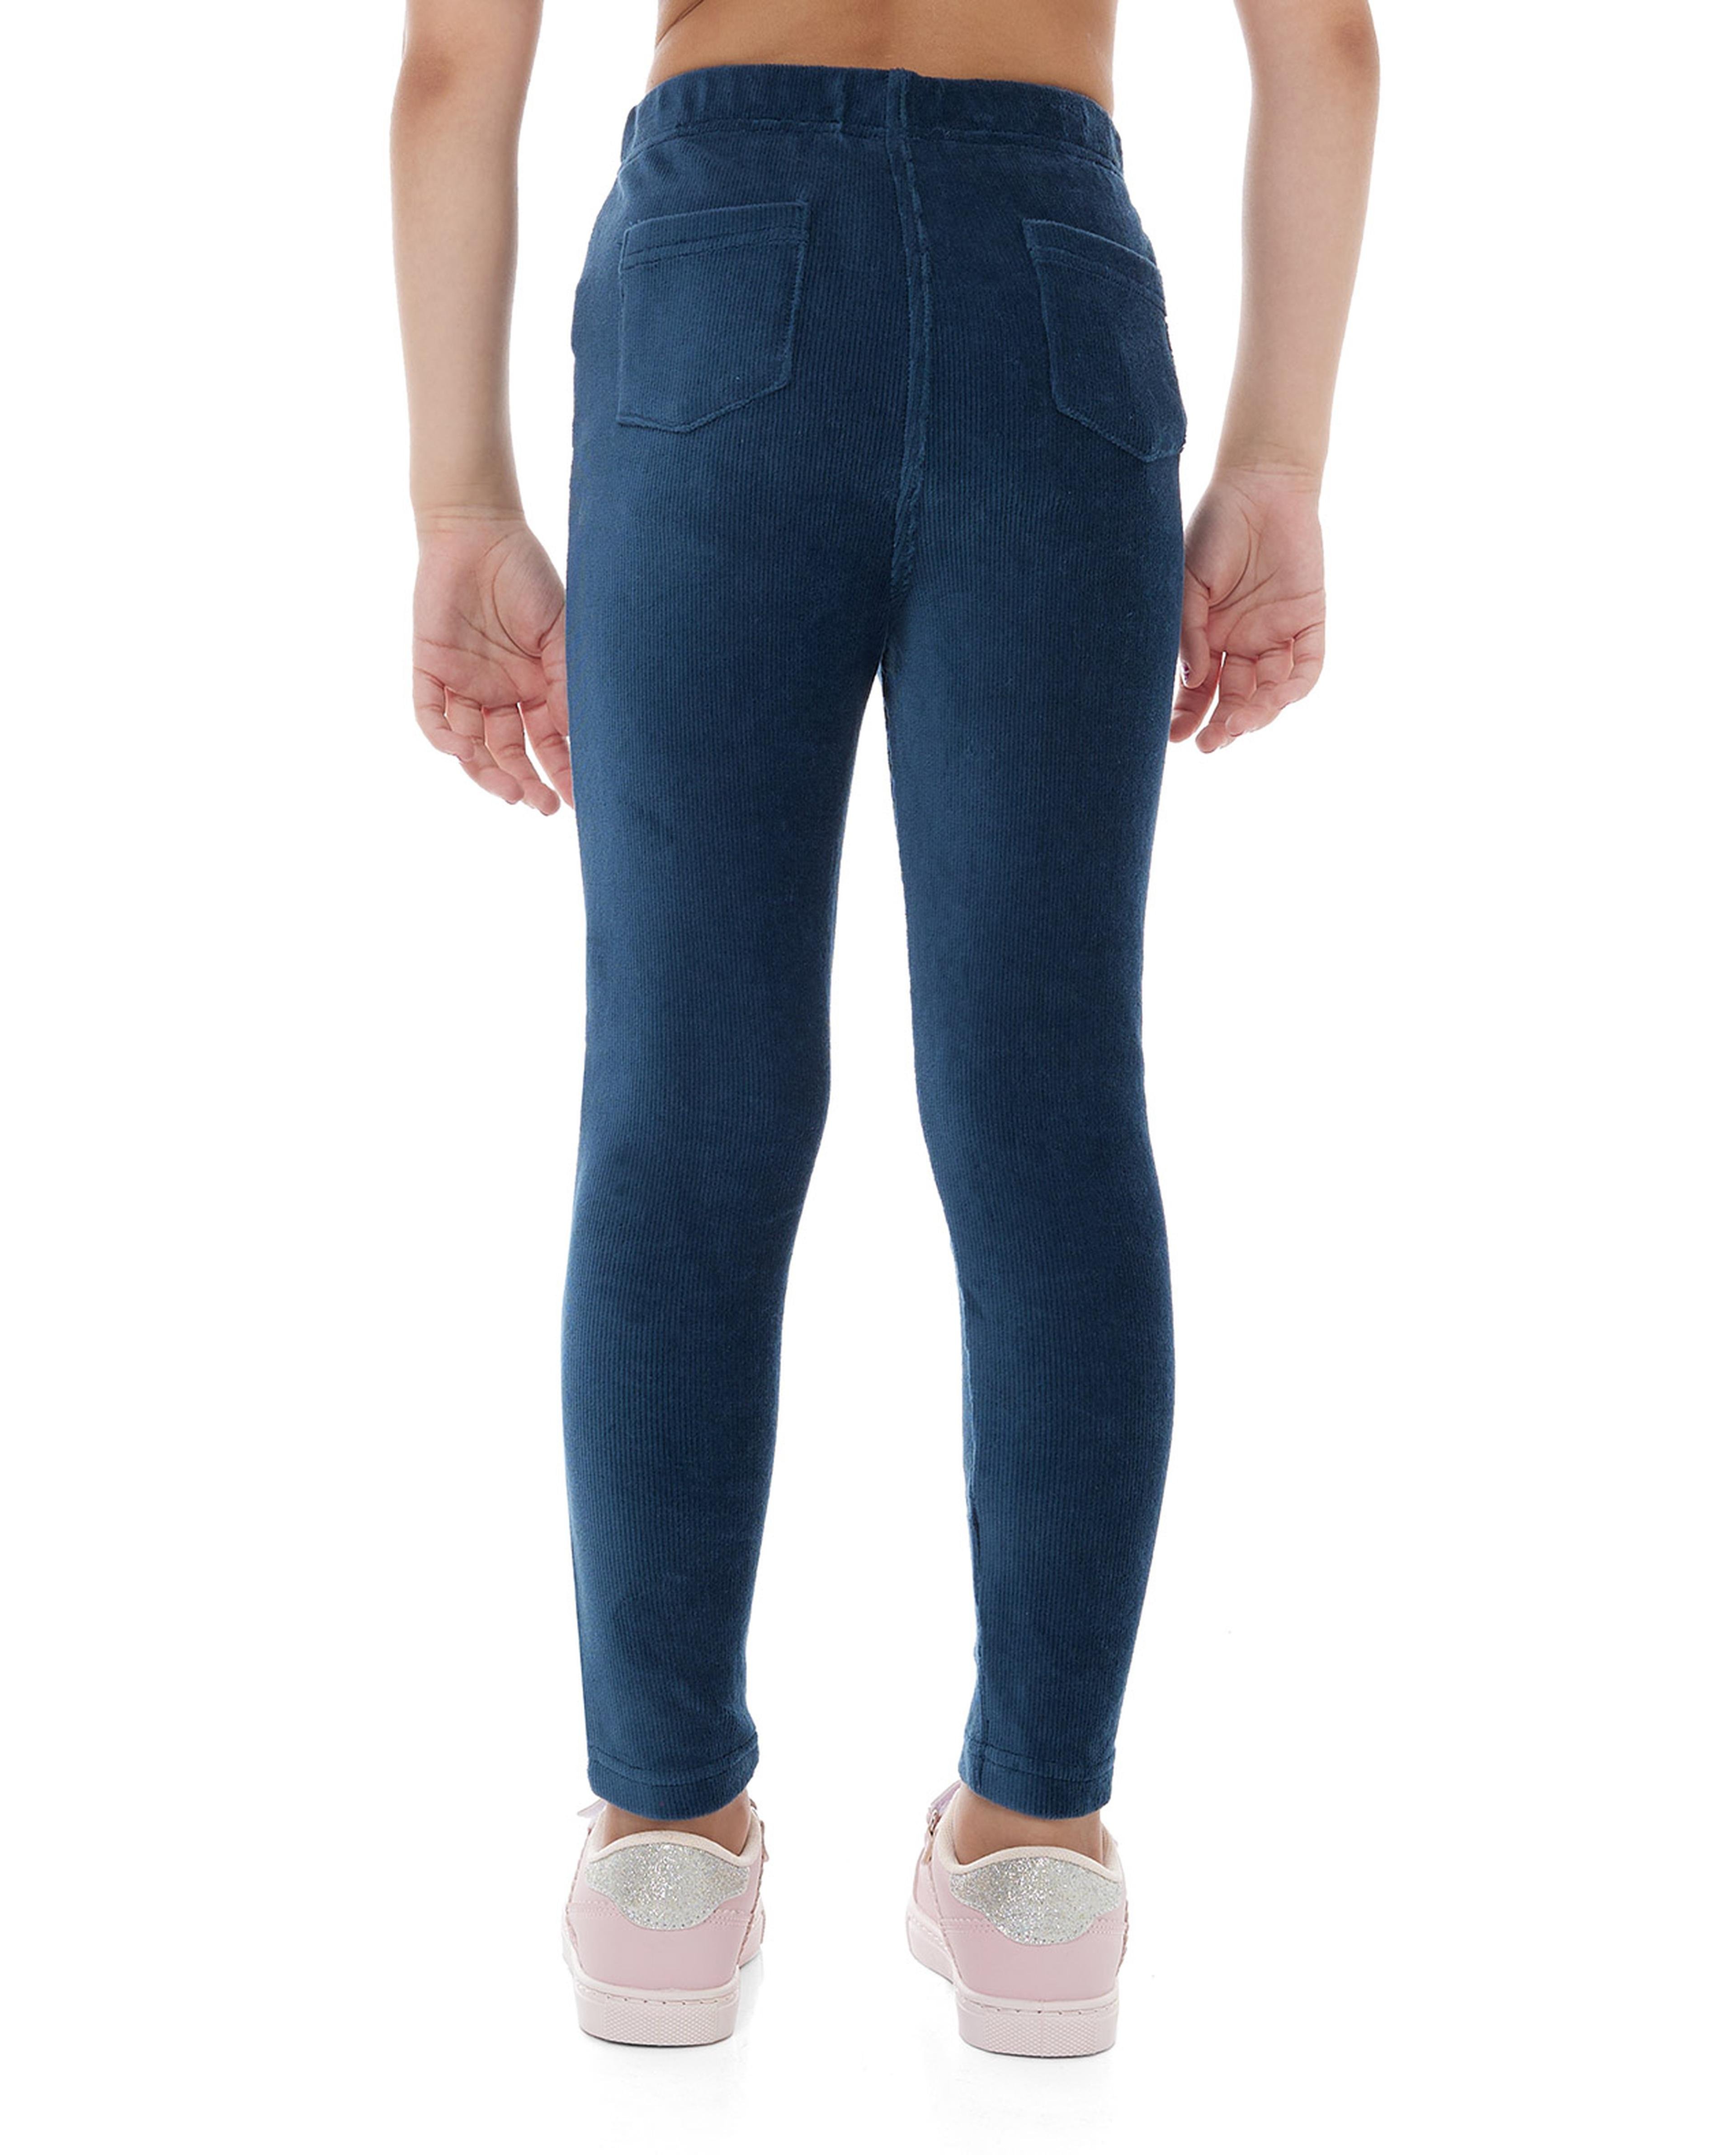 Solid Slim Fit Pants with Elastic Waist